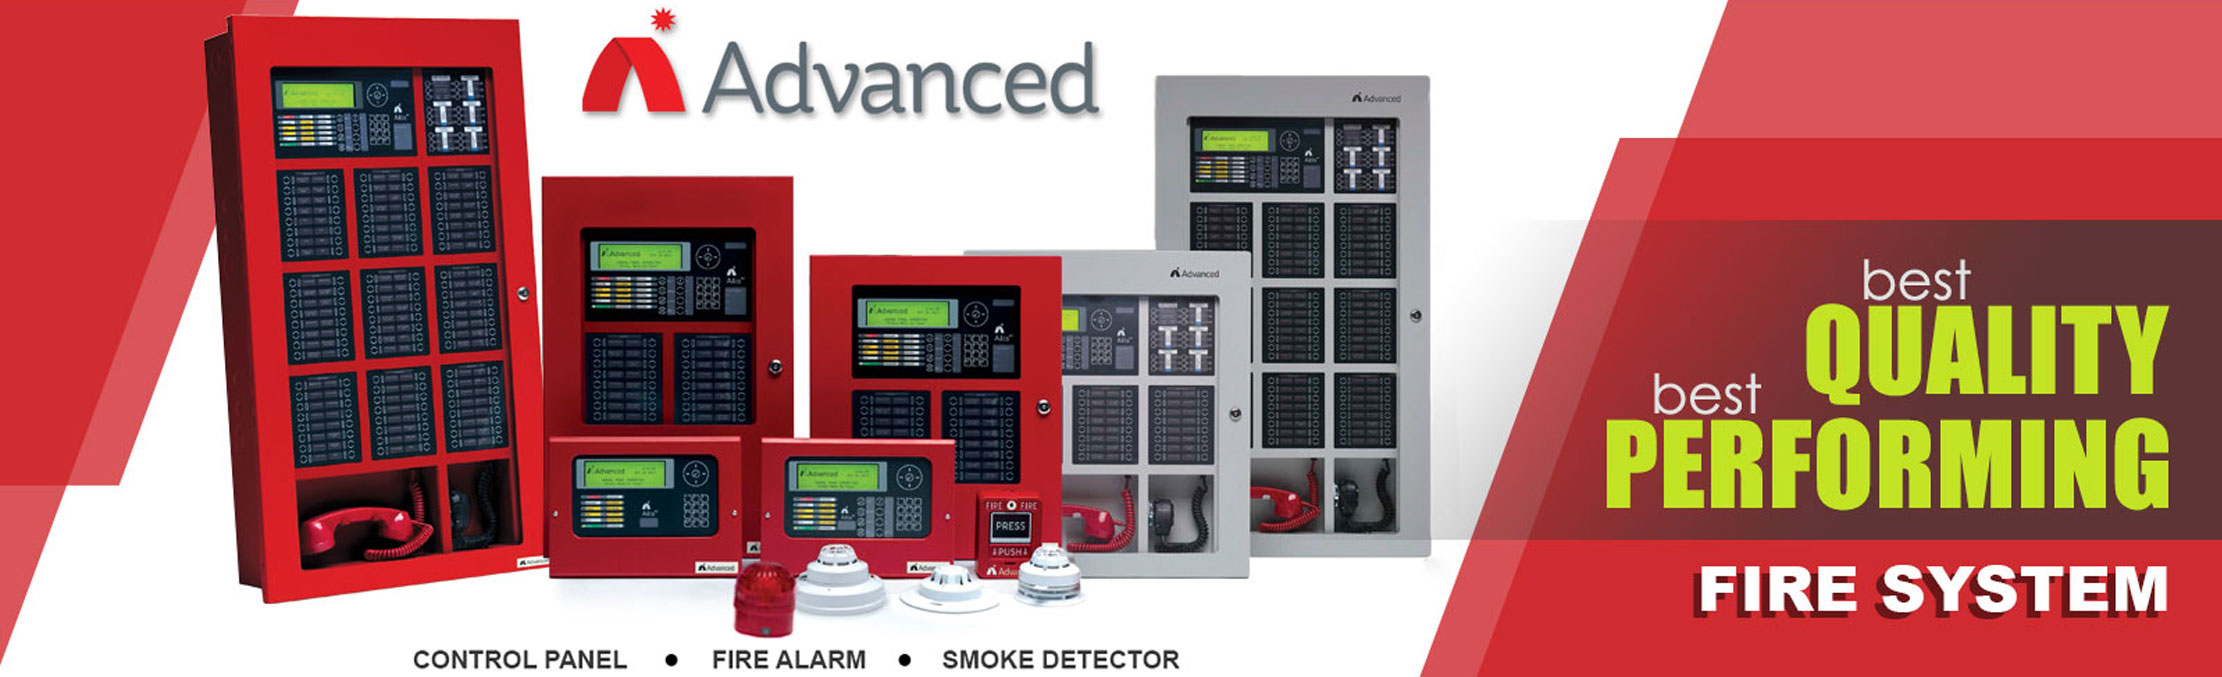 Advanced fire detection for hospitals.